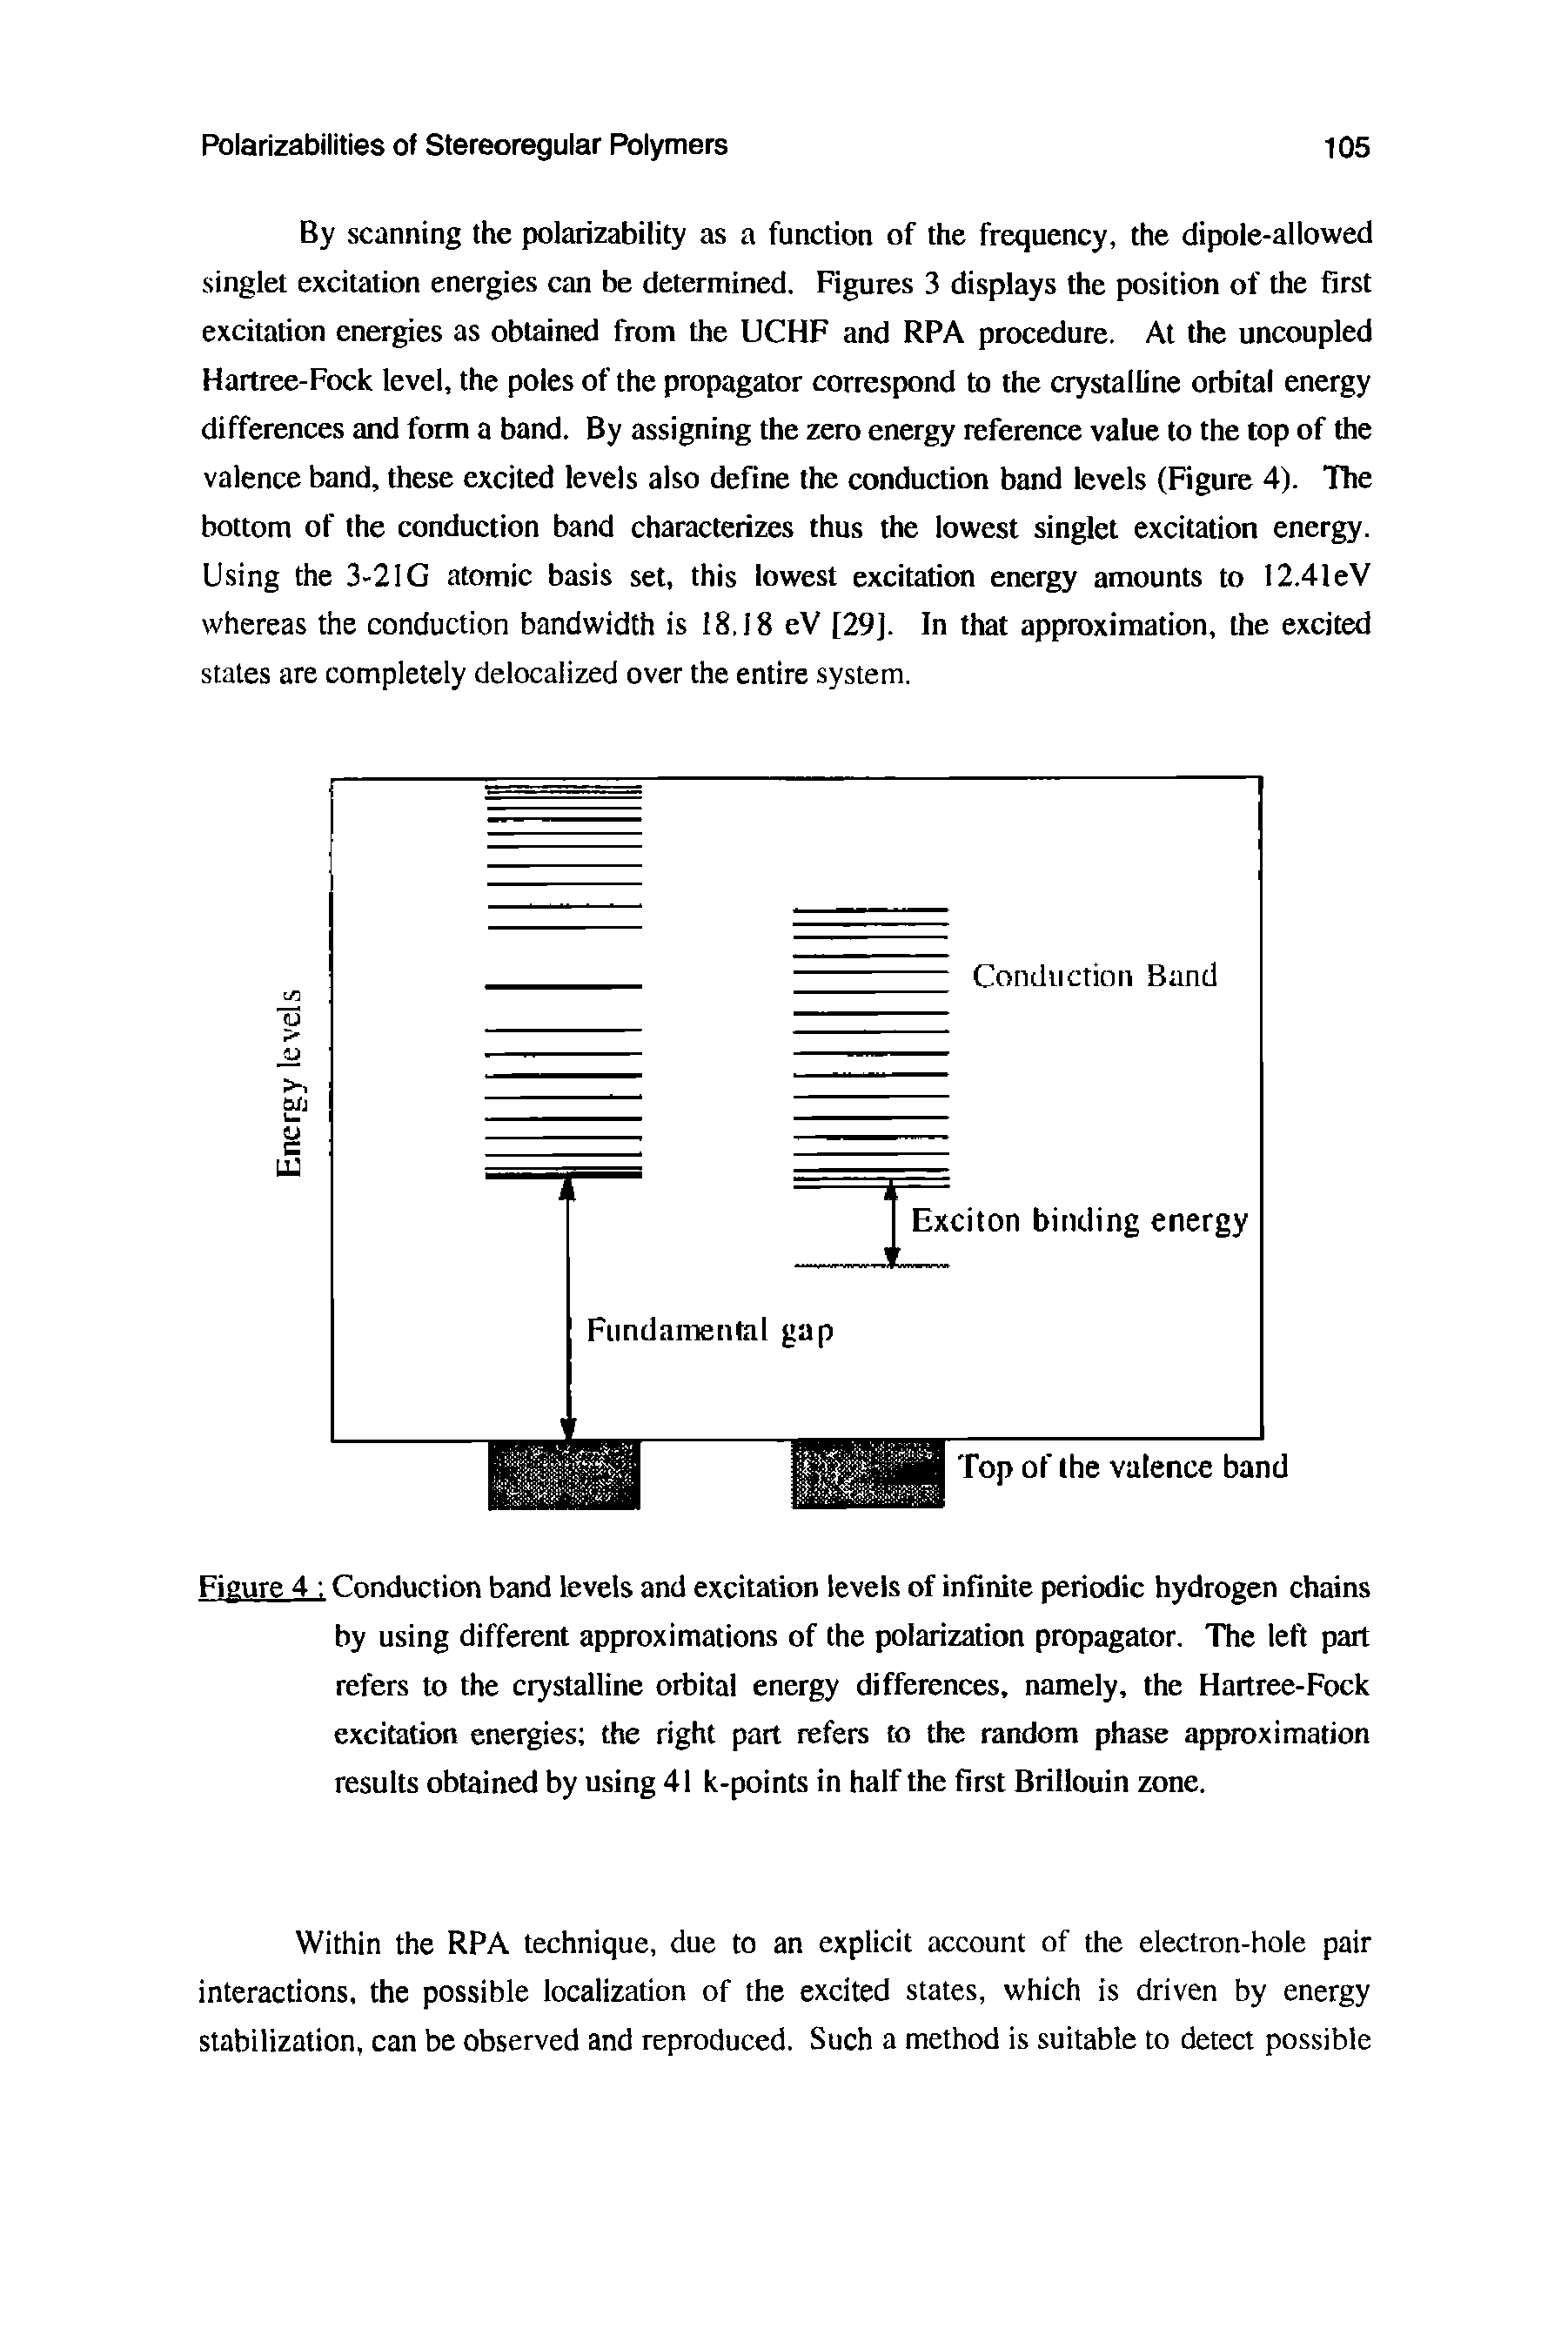 Figure 4 Conduction band levels and excitation levels of infinite periodic hydrogen chains by using different approximations of the polarization propagator. The left part refers to the crystalline orbital energy differences, namely, the Hartree-Fock excitation energies the right part refers to the random phase approximation results obtained by using 41 k-points in half the first Brillouin zone.